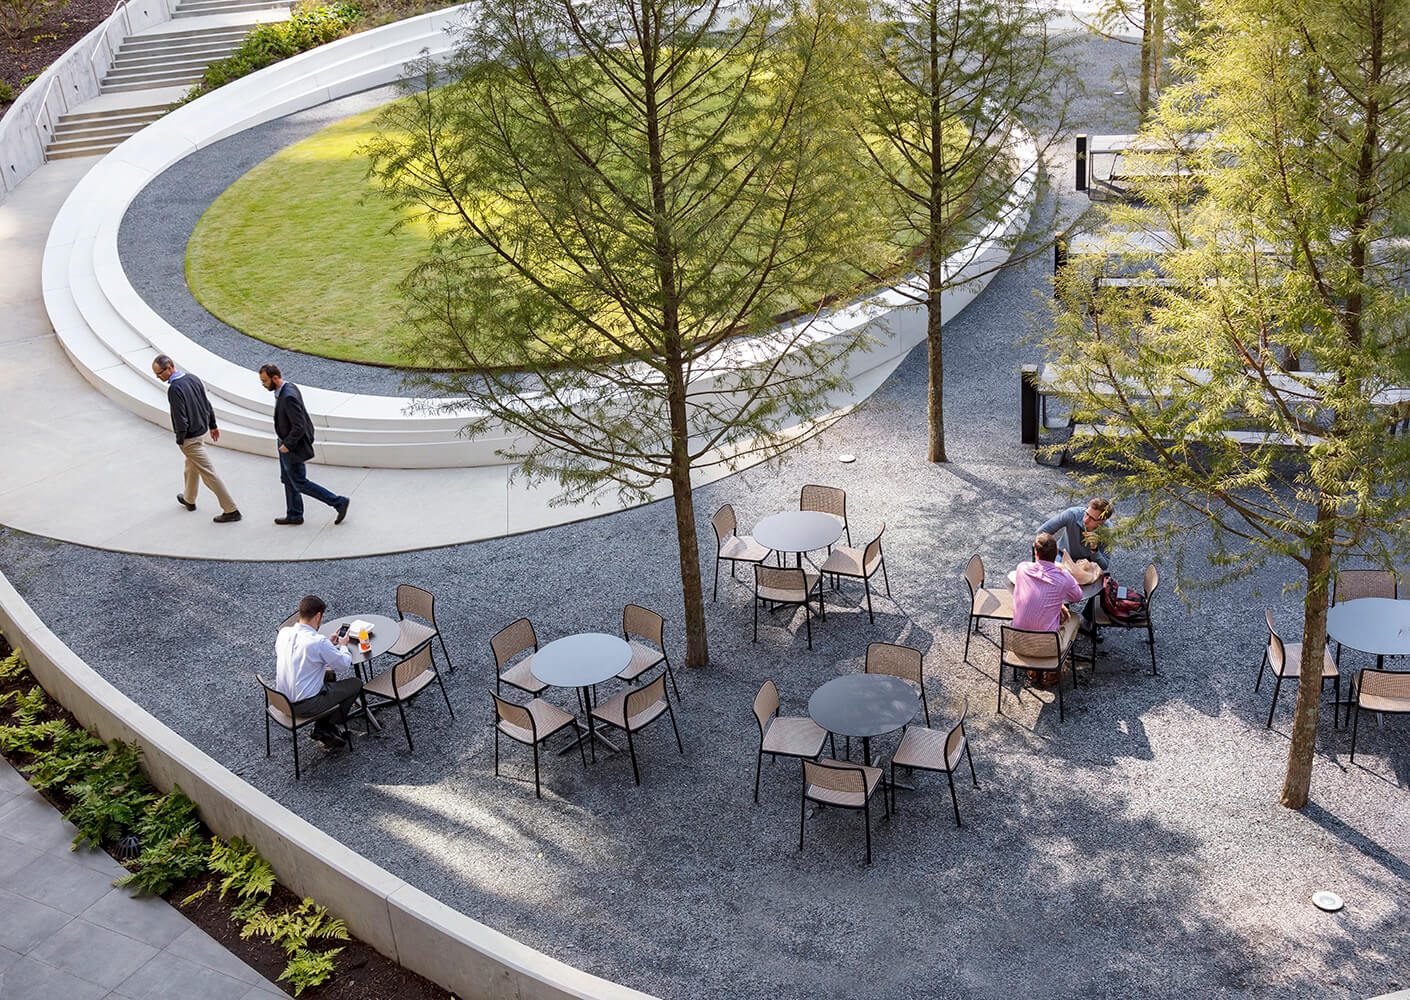 People gather and work at the outdoor seating arrangements by the courtyard's elliptical lawn